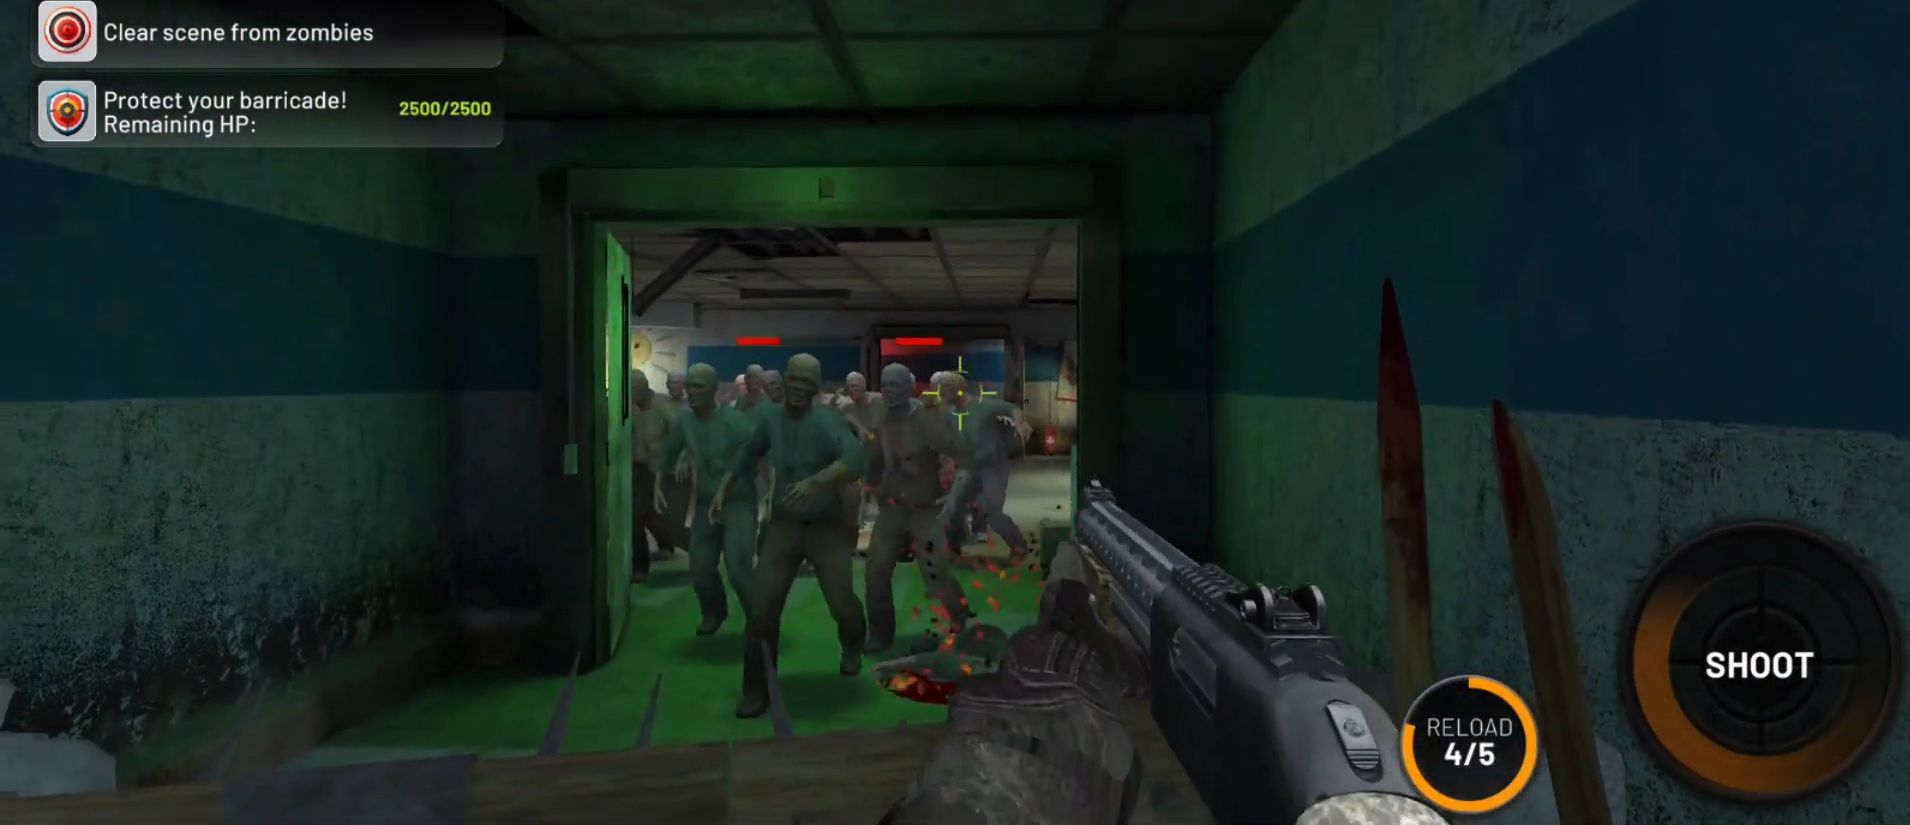 Gameplay of the Deadlander: FPS Zombie Game for Android phone or tablet.